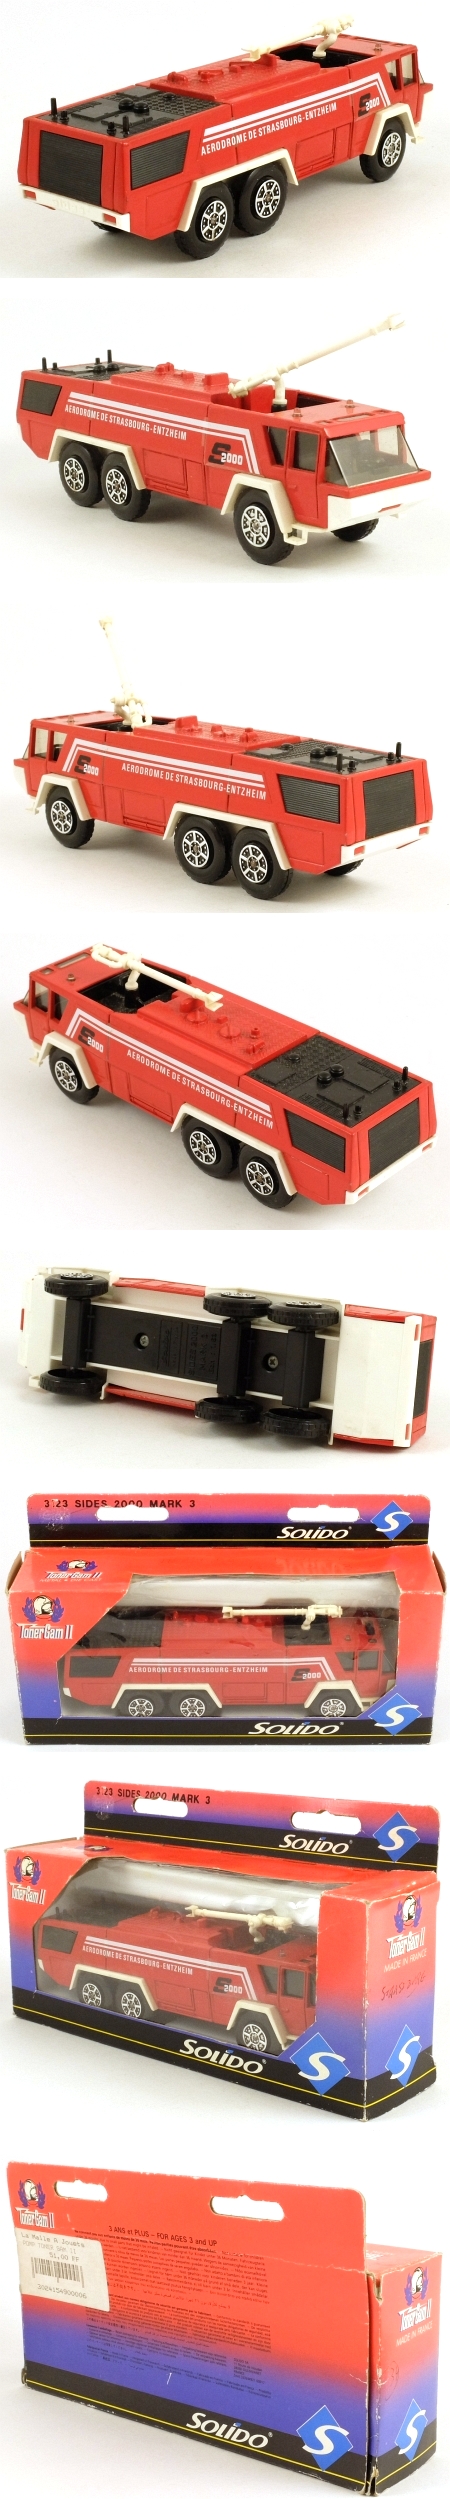 3123 Sides 2000 Airport Fire Tender